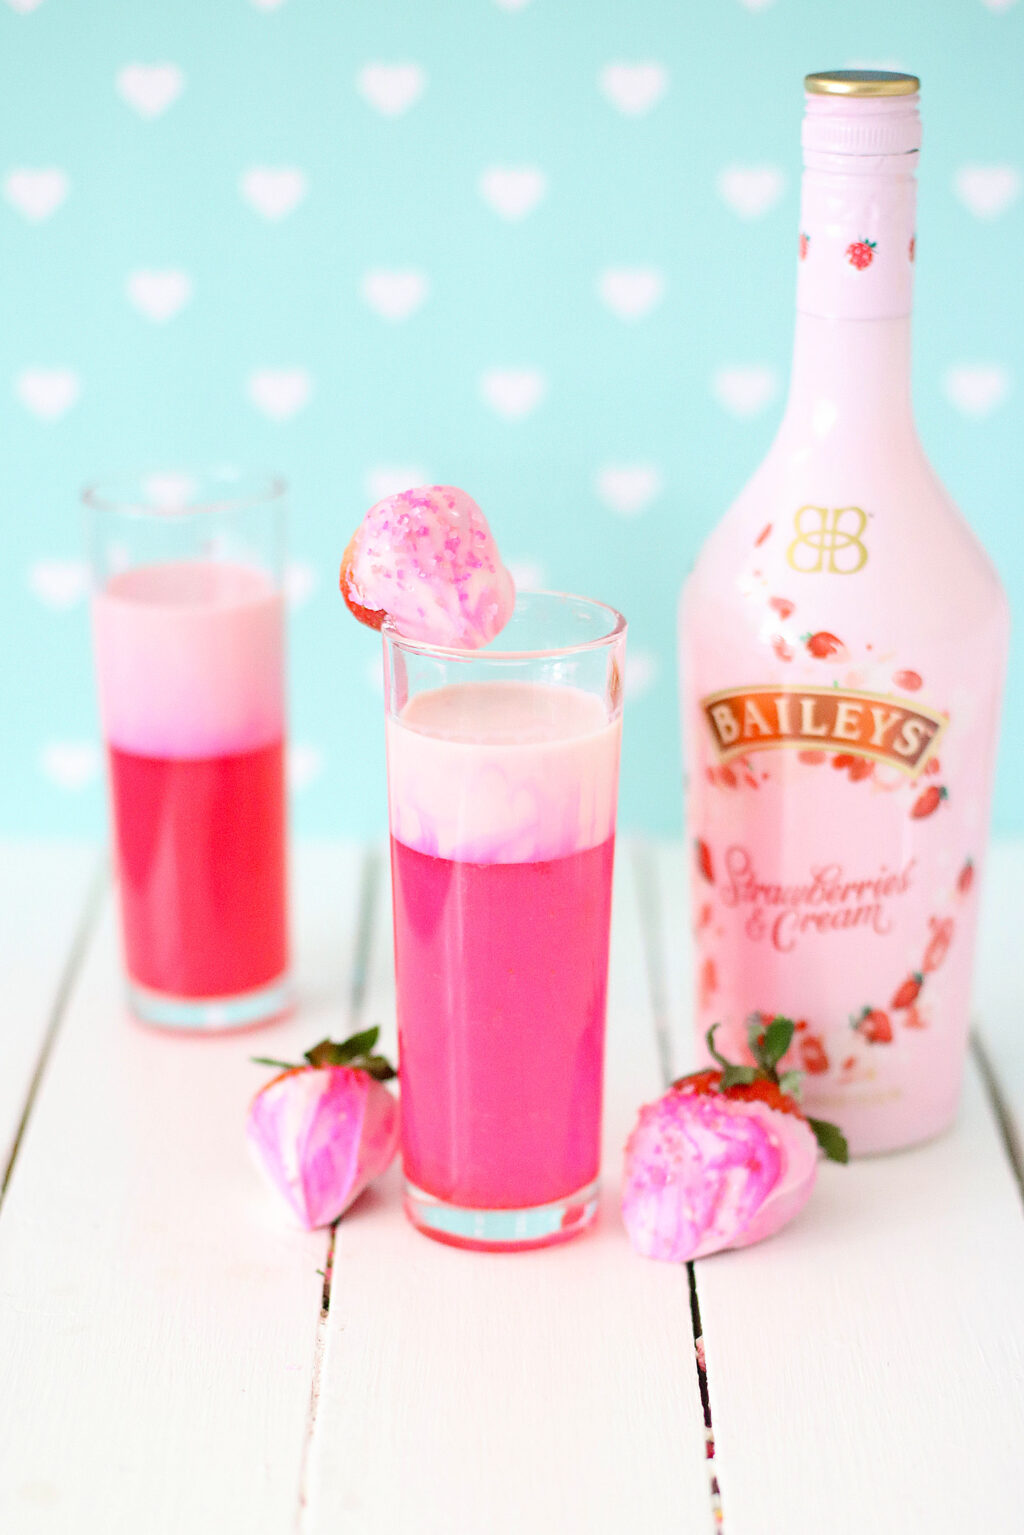 shimmery pink cocktail in clear glass with strawberries next to it